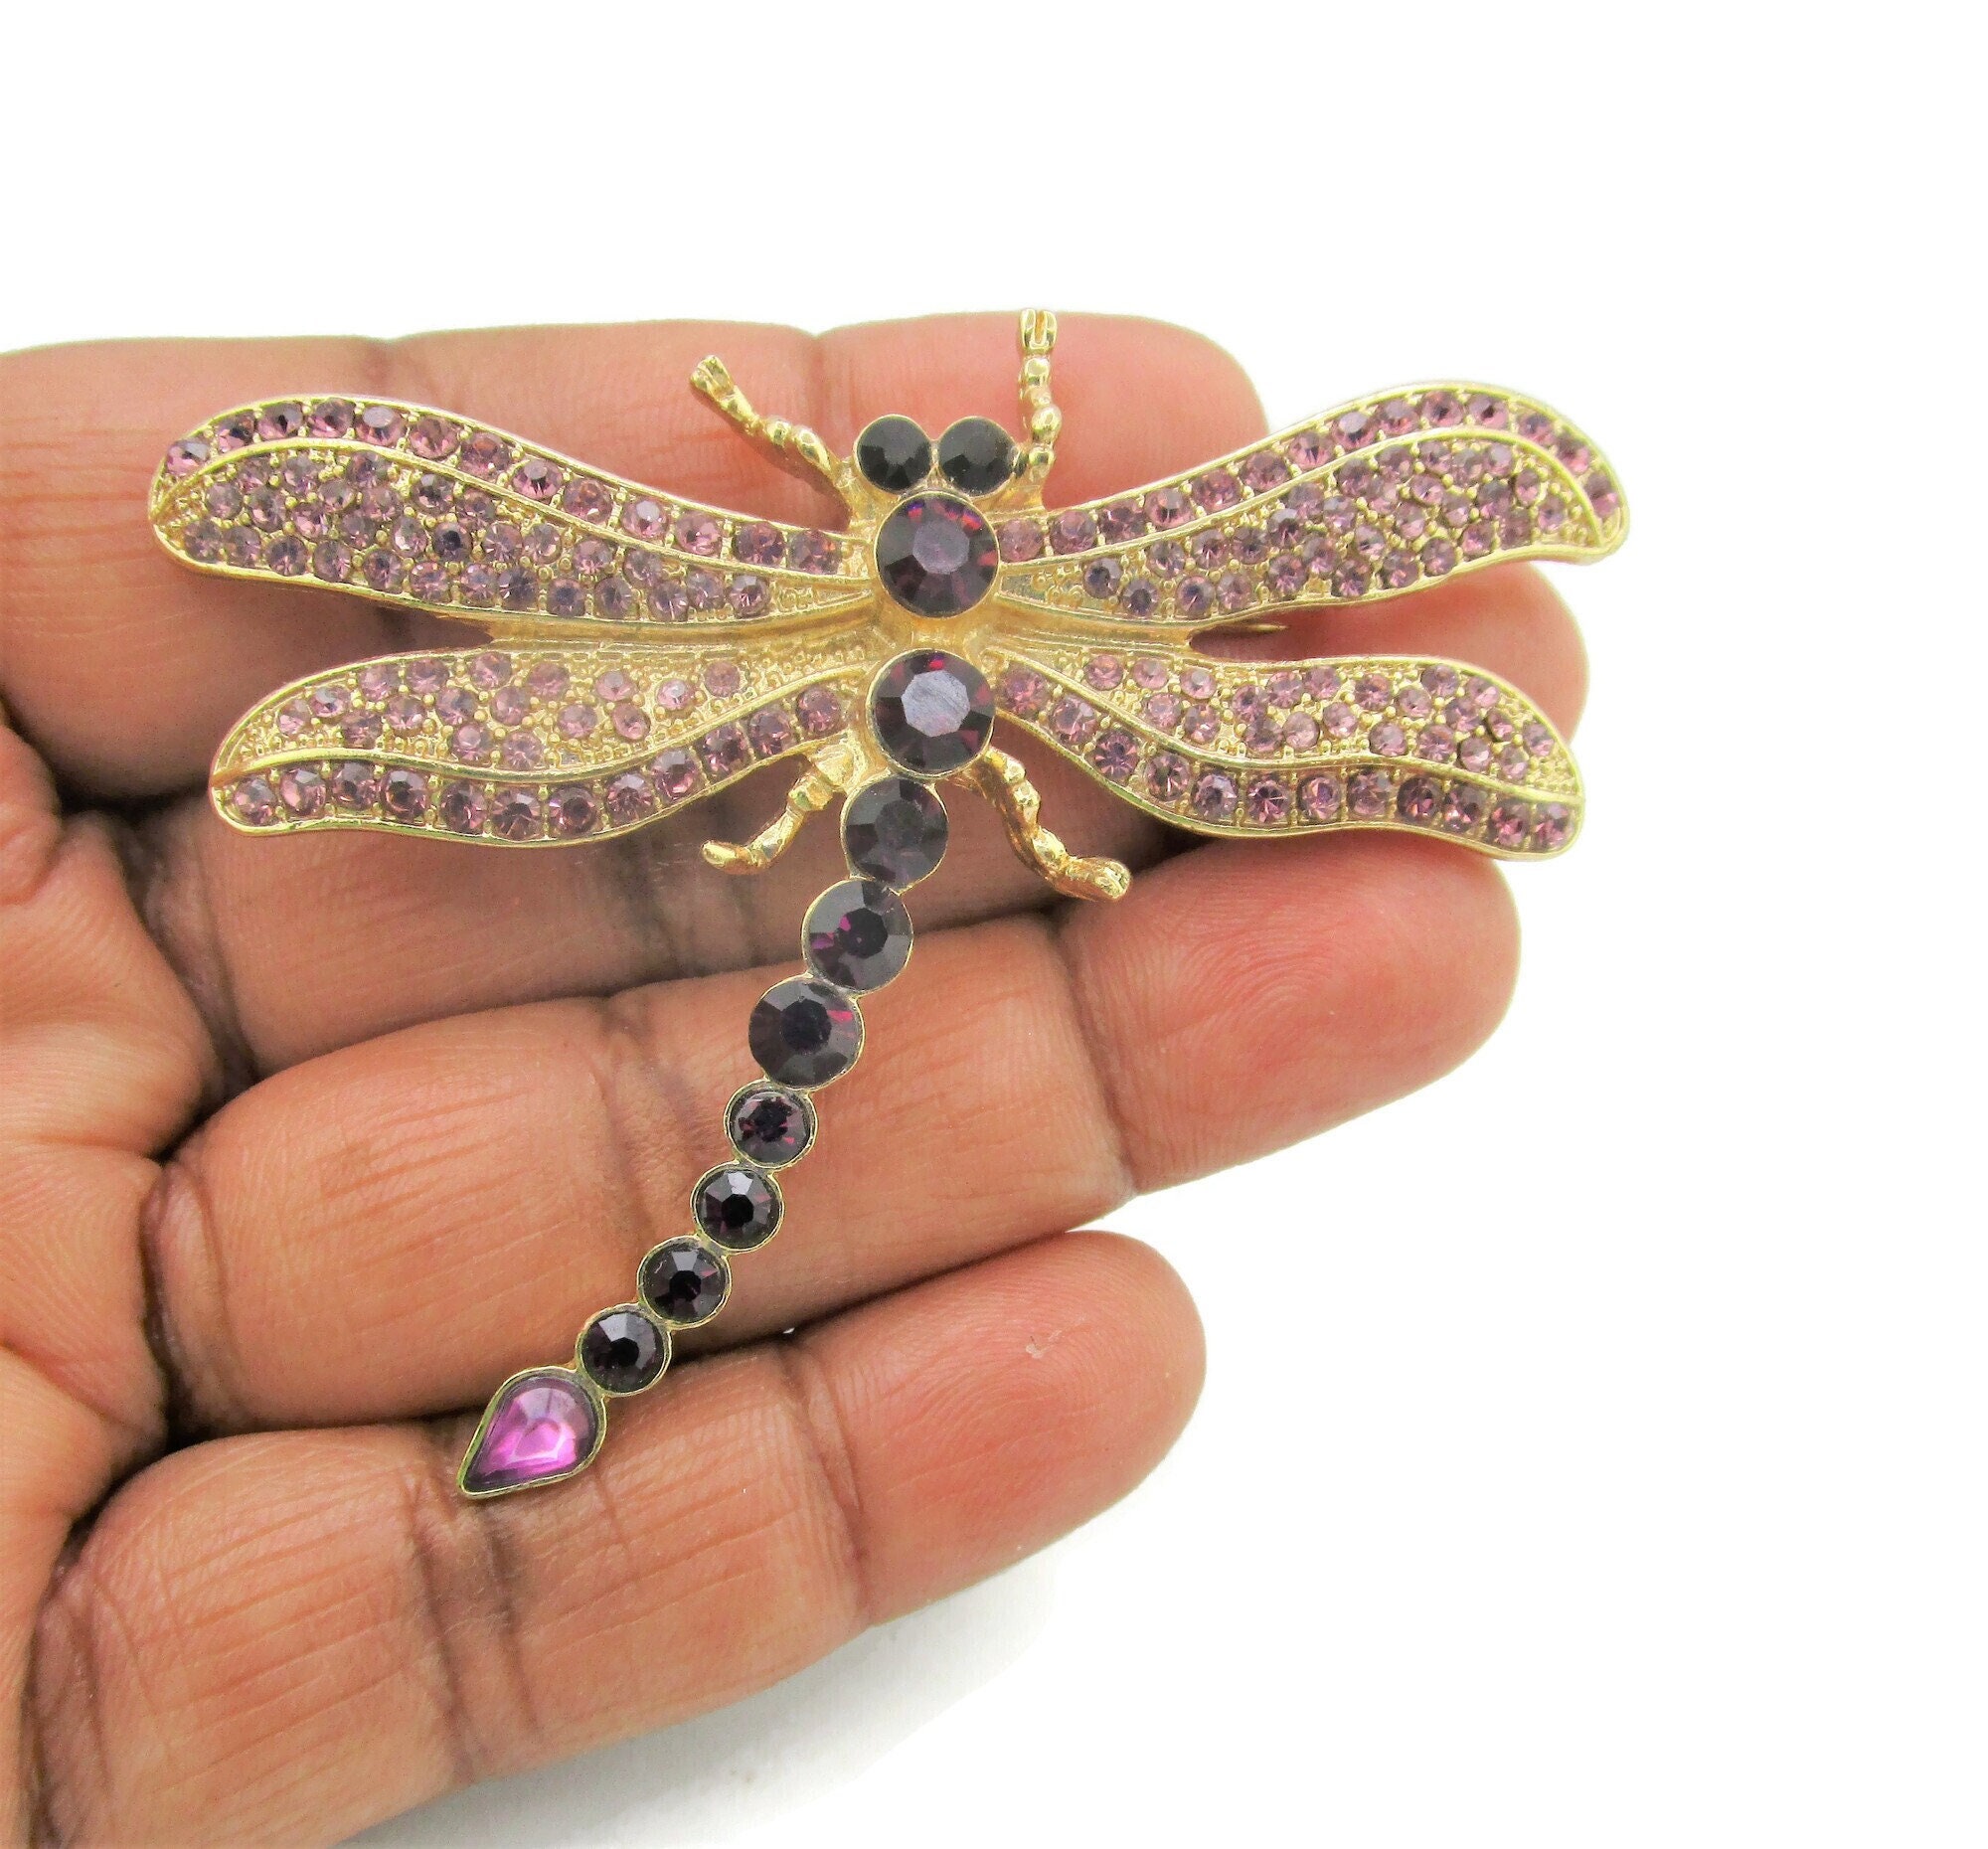 DragonFly Brooch/Amethyst Glass Rhinestone &  Lilac Crystals Pin/ Gold Tone Bug /Odonata infraorder Anisoptera /Winged Insect Jewelry